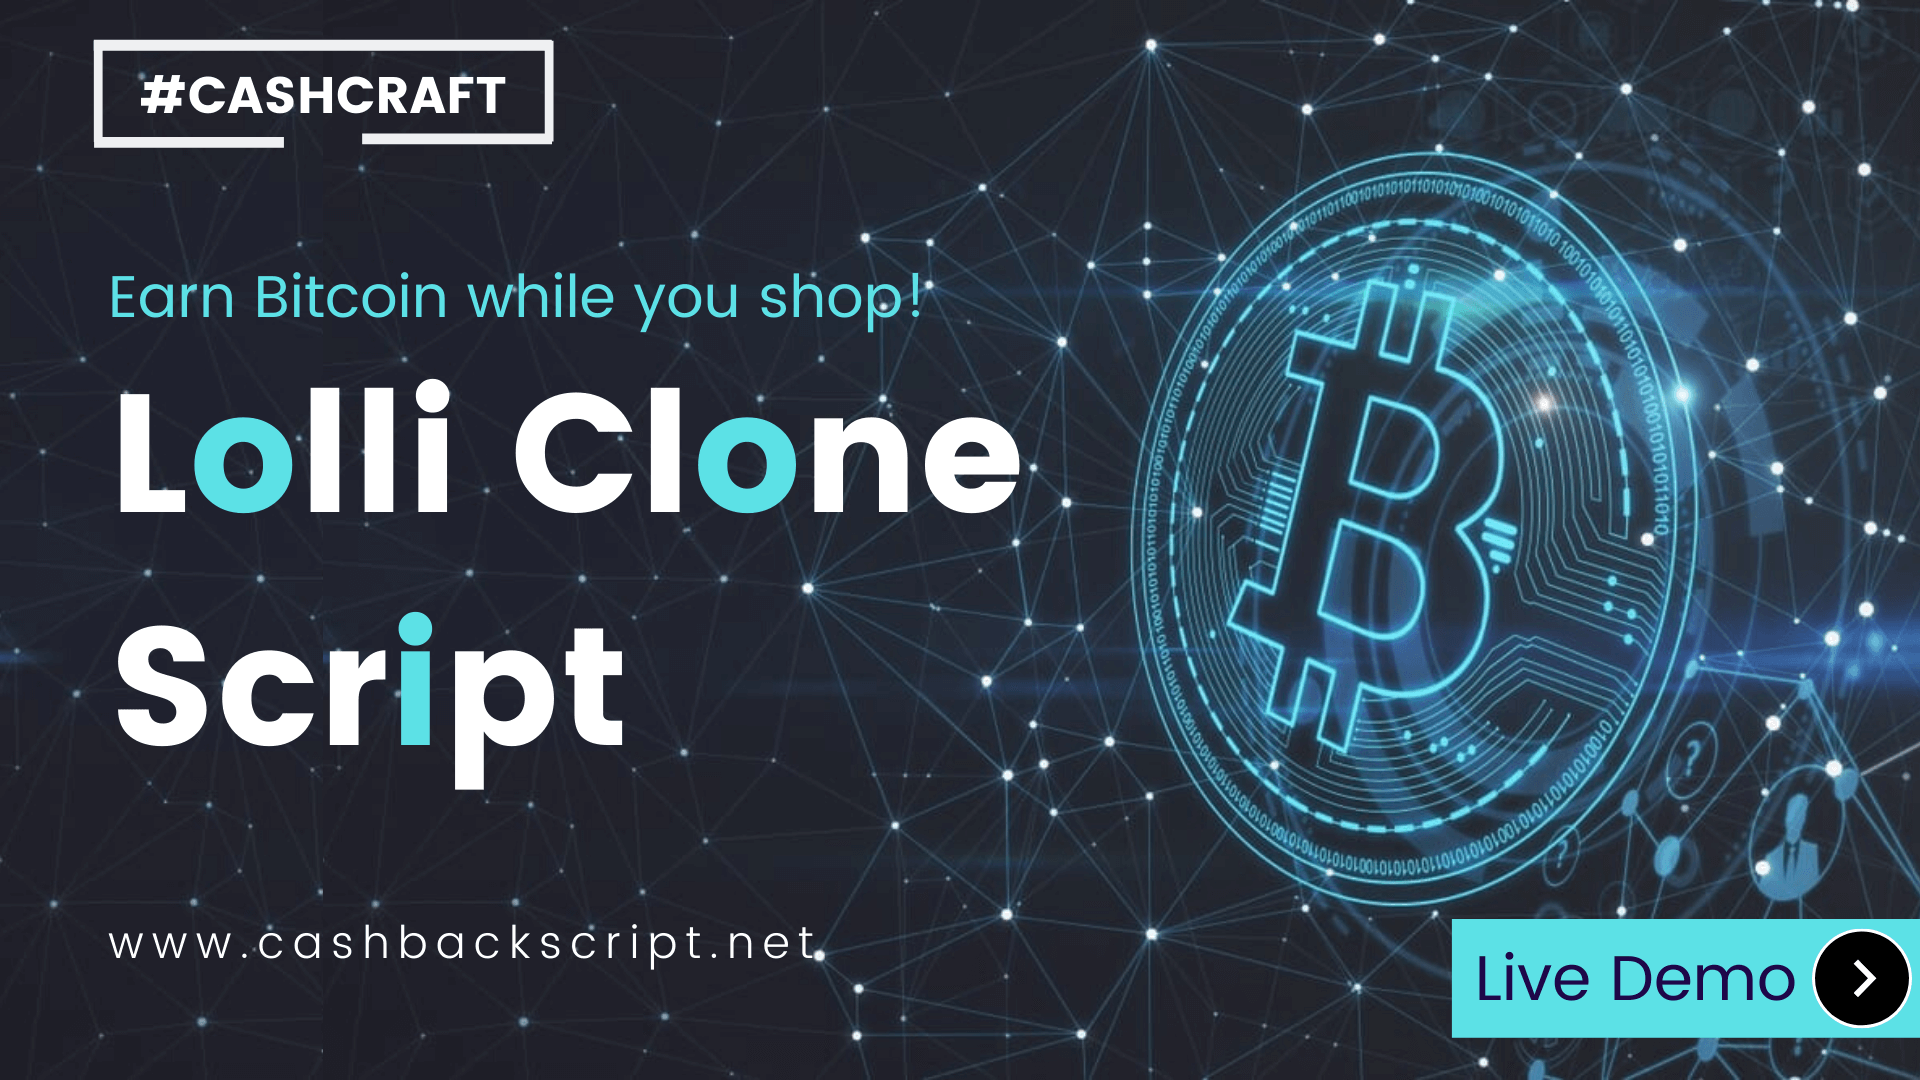 Lolli Clone Script: Things You Must Know Before Starting a Bitcoin Cashback business like Lolli!